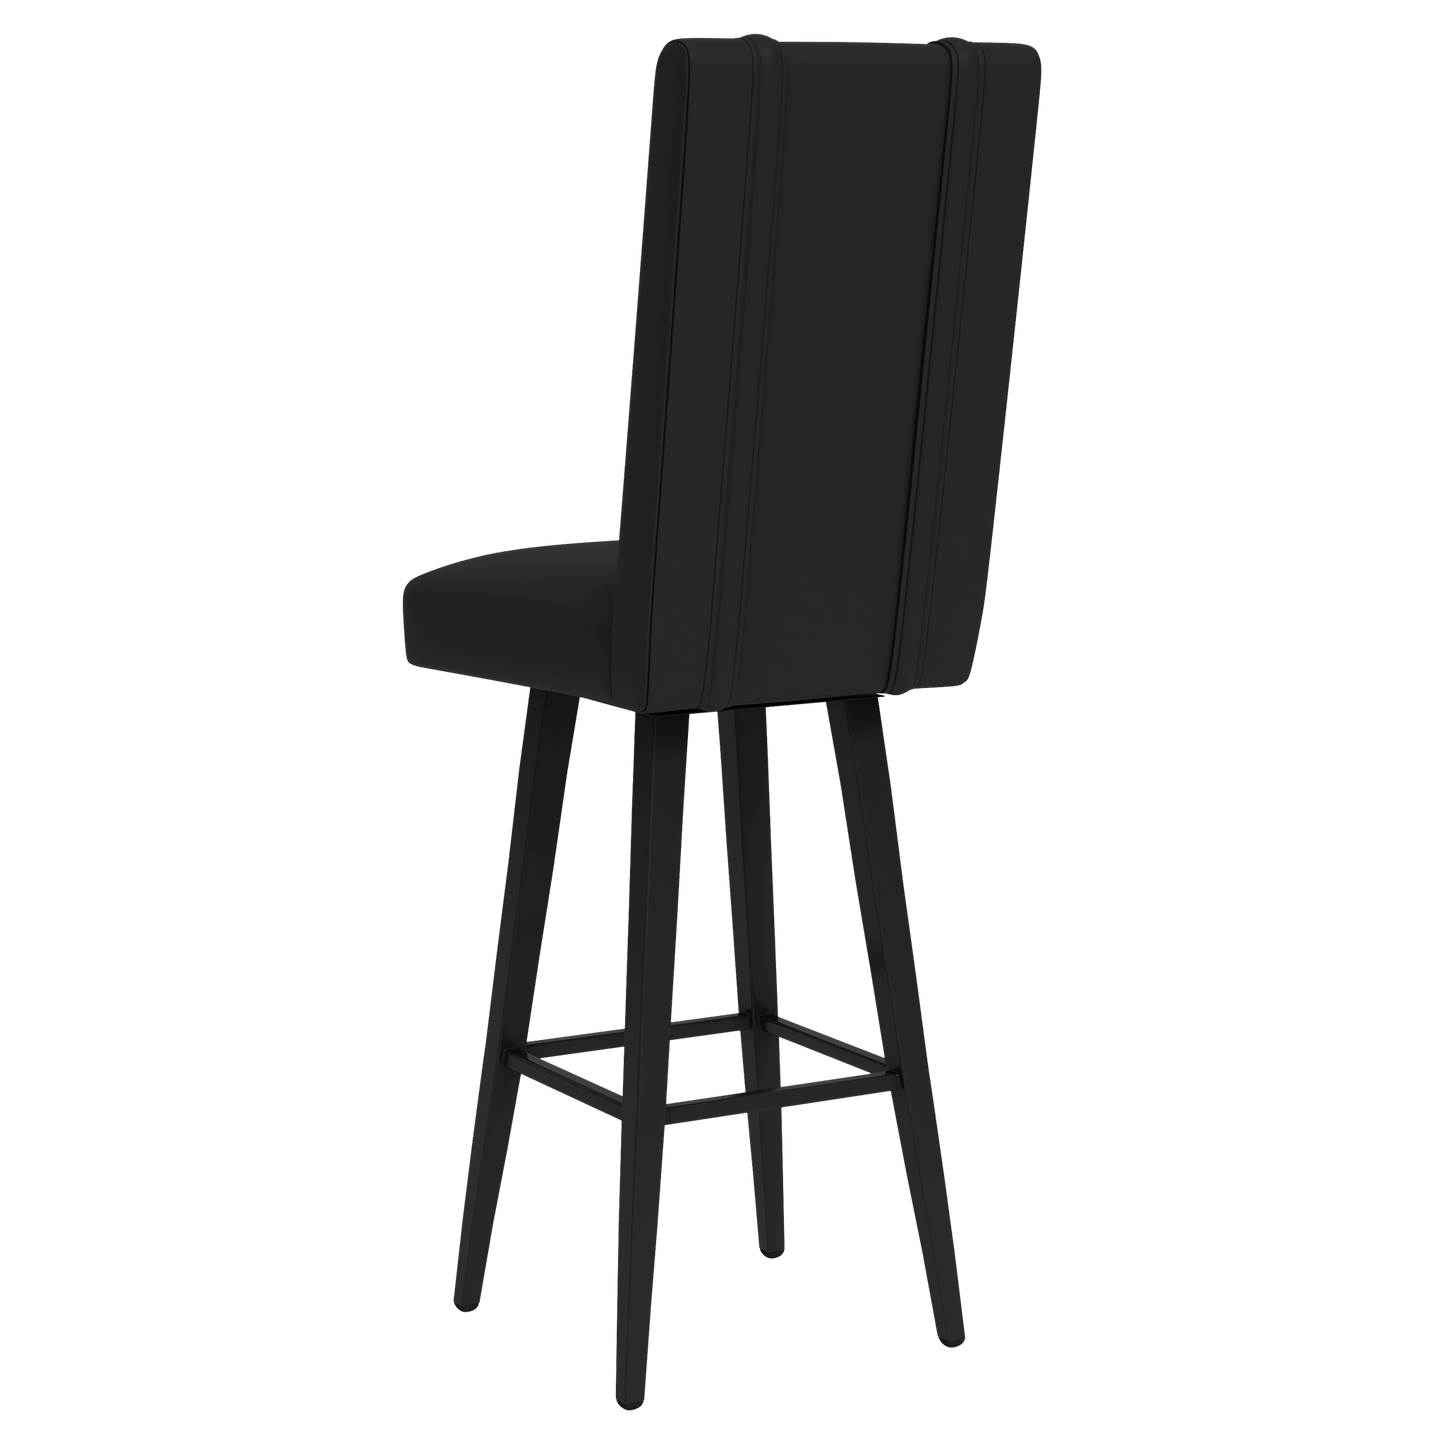 Swivel Bar Stool 2000 with Bored Apes Primary Logo